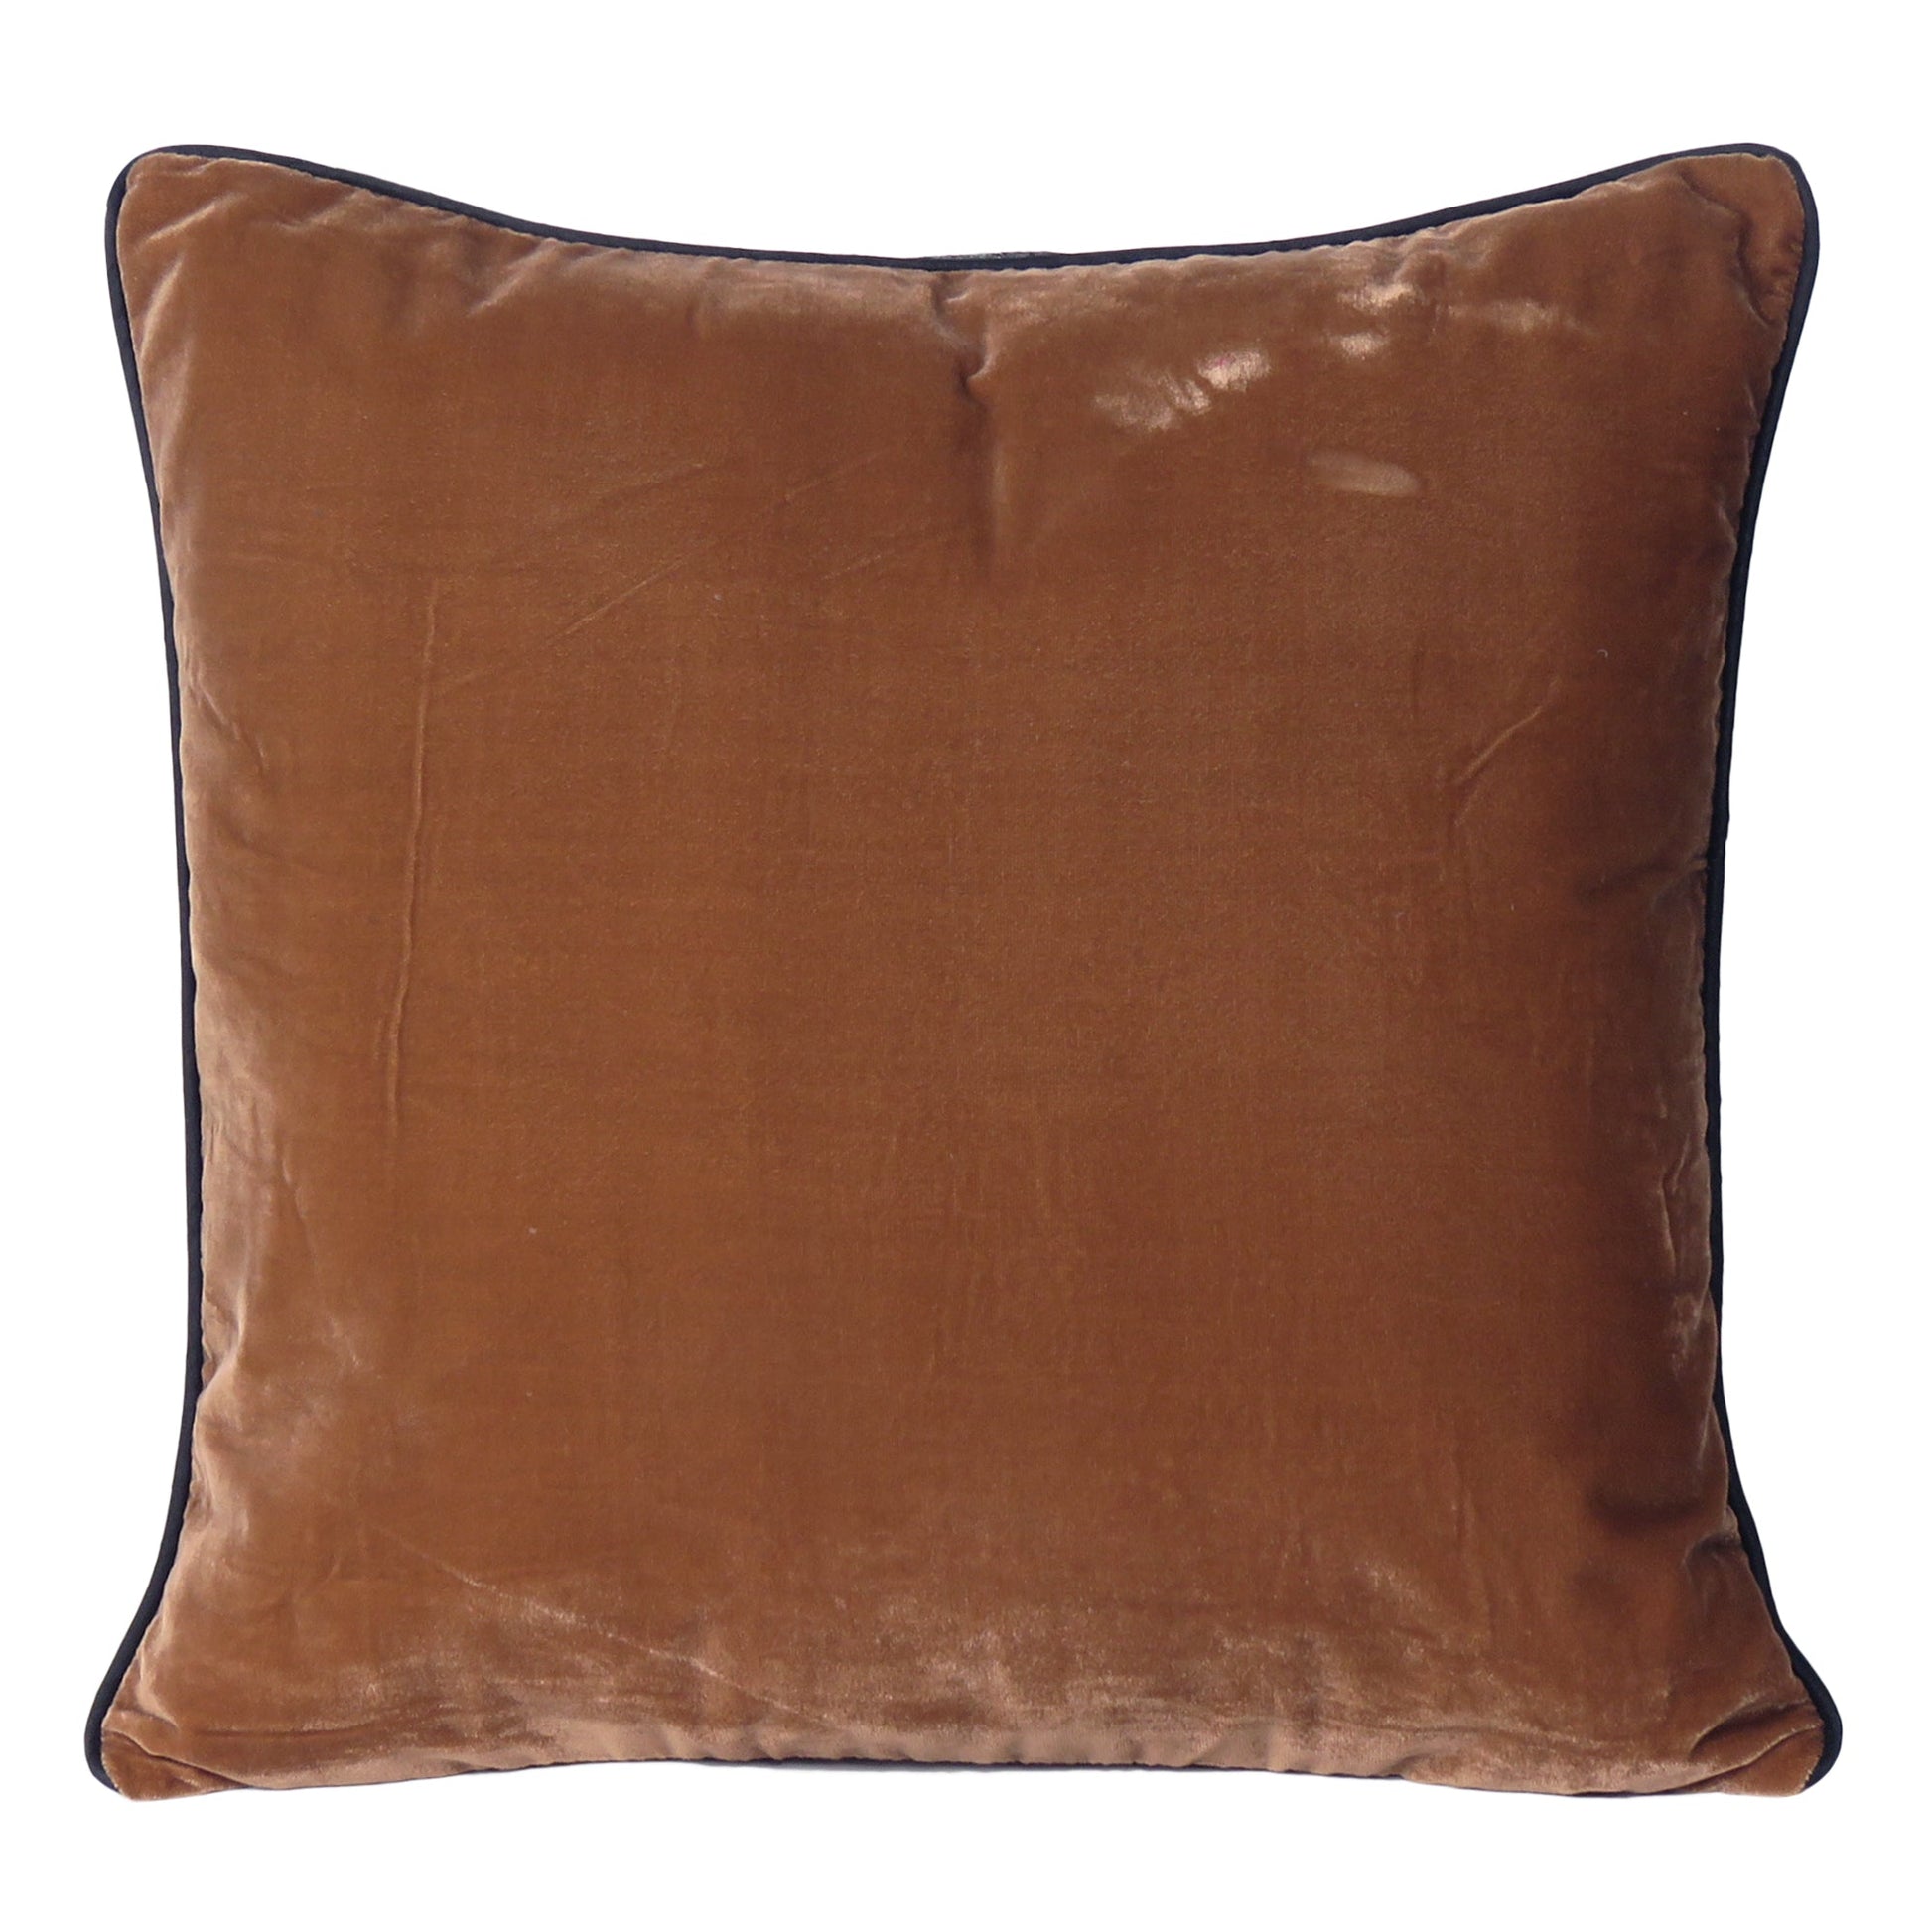 Light Brown Velvet Cushion Cover with Black Piping Edge in Set of 2